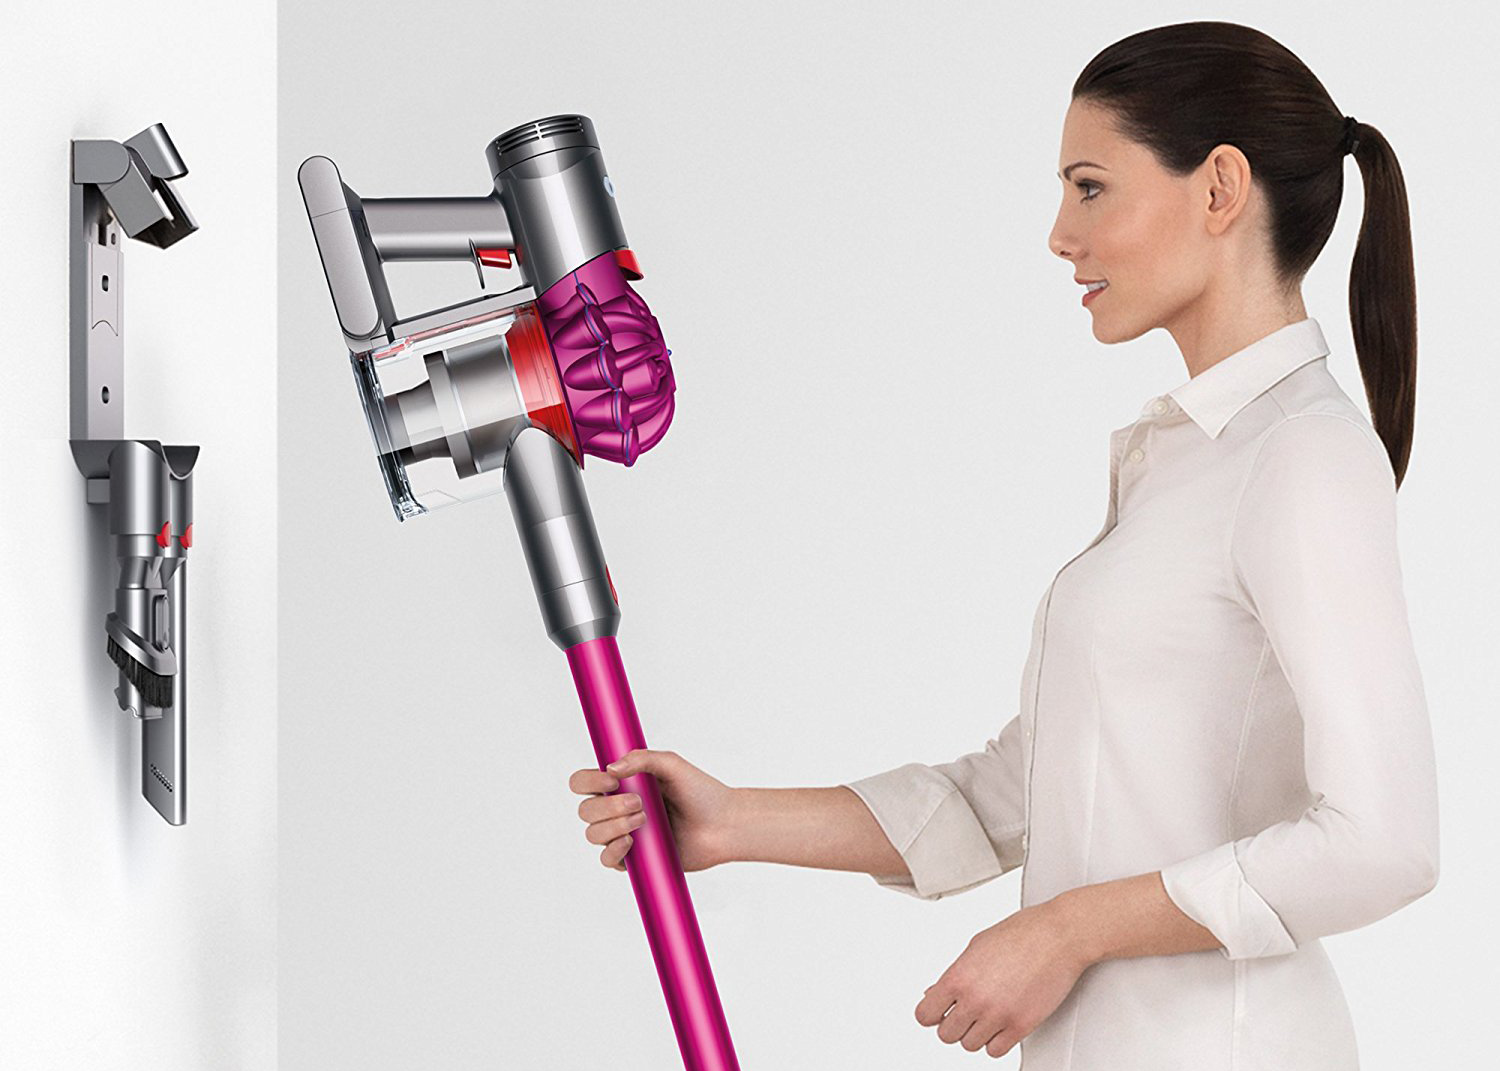 The best Christmas deal on a Dyson cordless vacuum is still available today â BGR